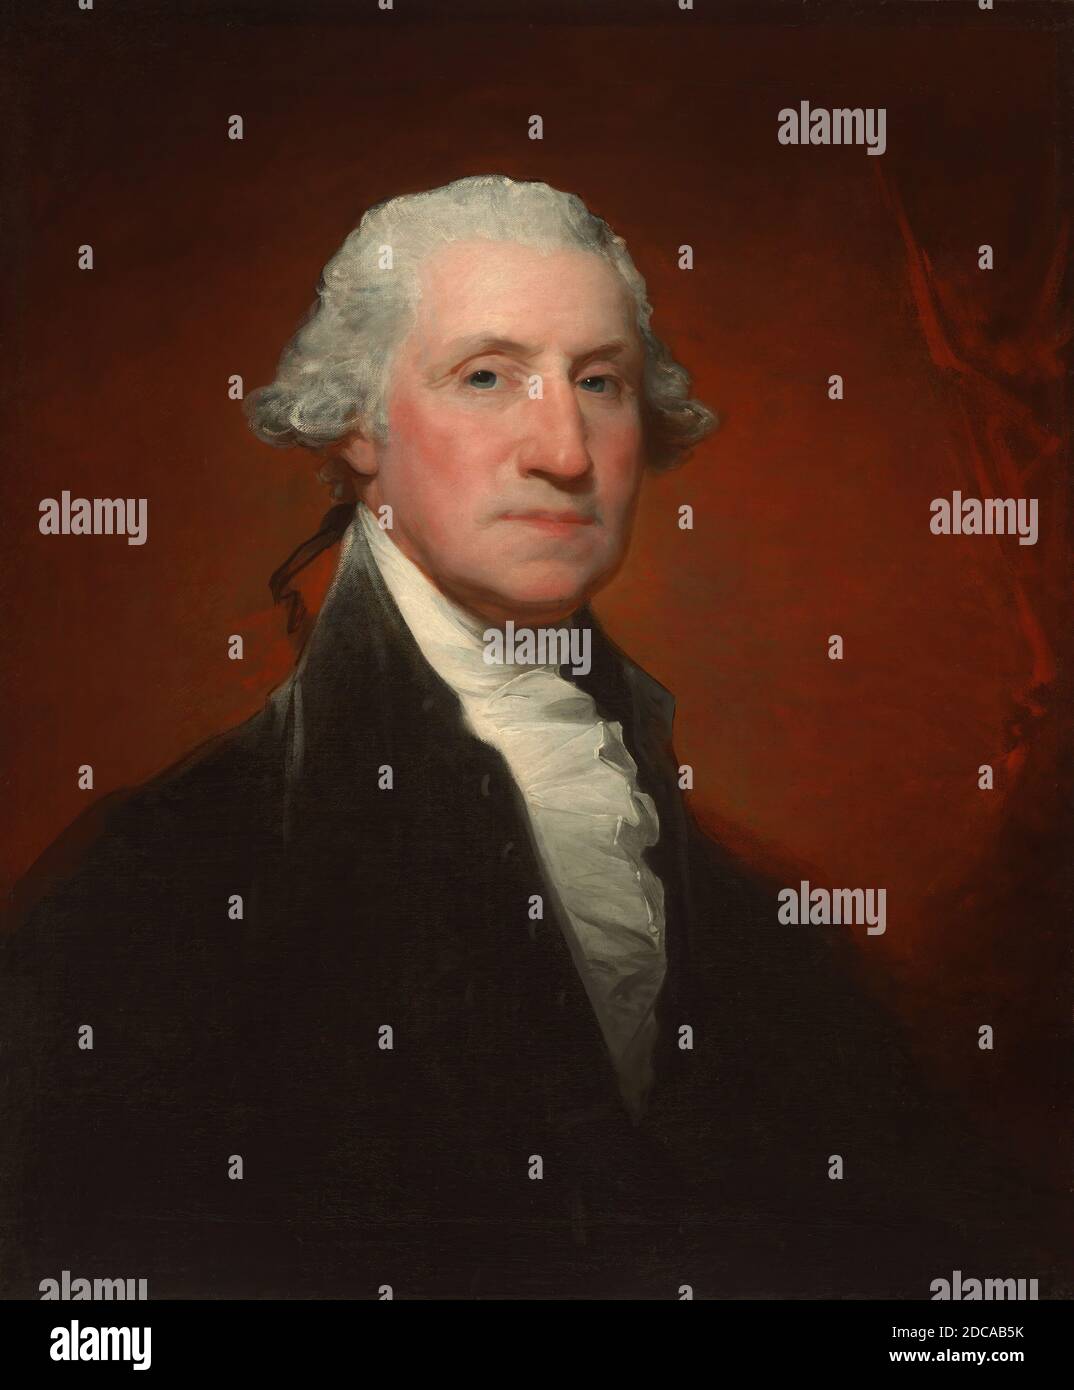 Gilbert Stuart, (painter), American, 1755 - 1828, George Washington (Vaughan-Sinclair portrait), 1795, oil on canvas, overall: 73.8 x 61.1 cm (29 1/16 x 24 1/16 in.), framed: 92.7 x 80 x 9.5 cm (36 1/2 x 31 1/2 x 3 3/4 in Stock Photo